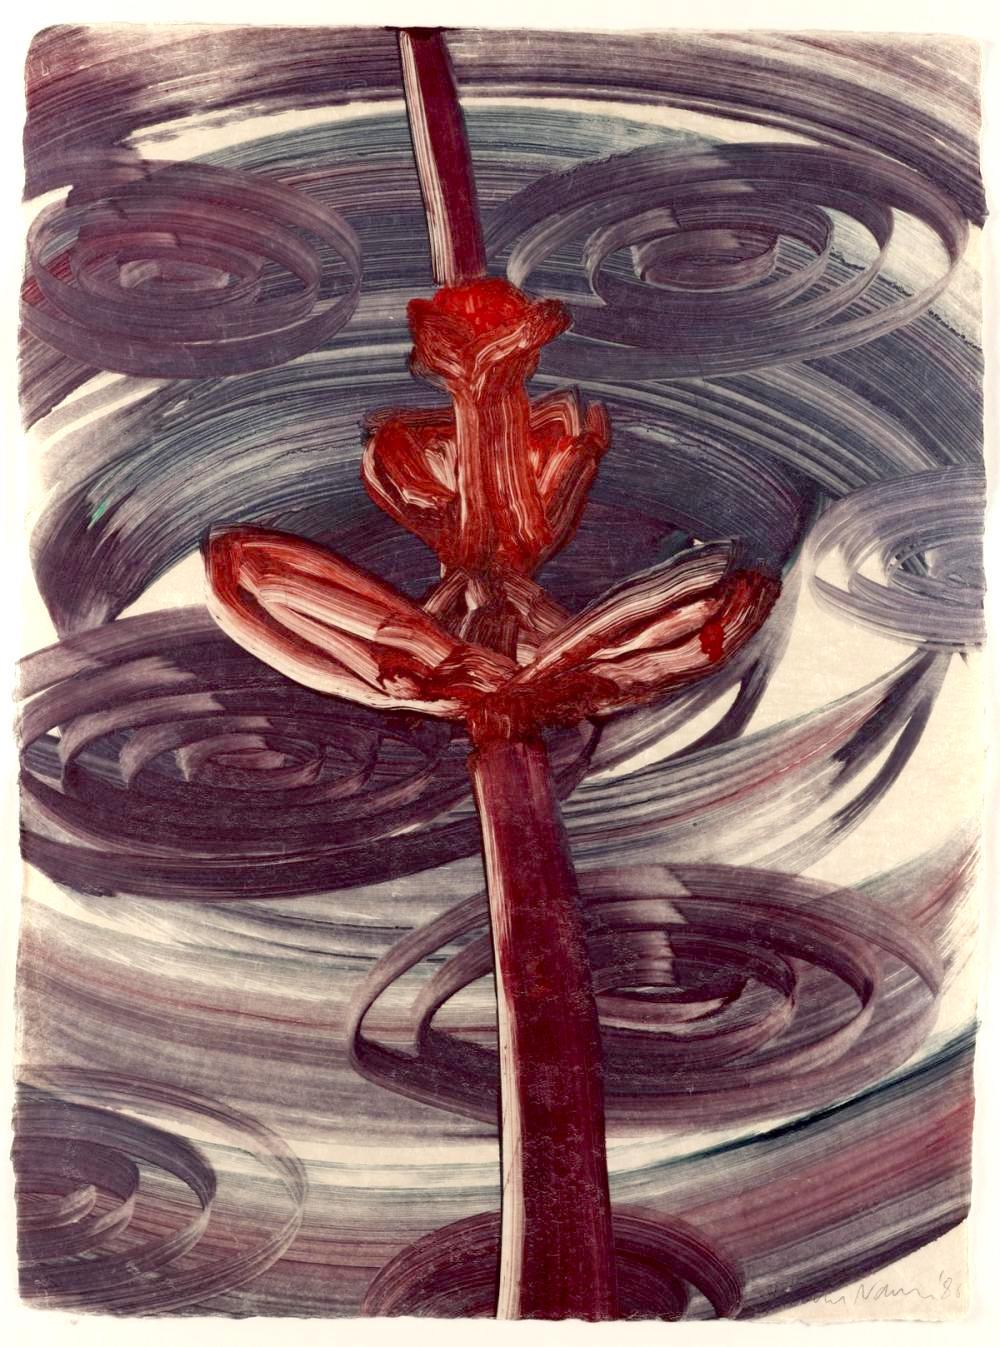 Untitled flower monotype - Art by James Nares